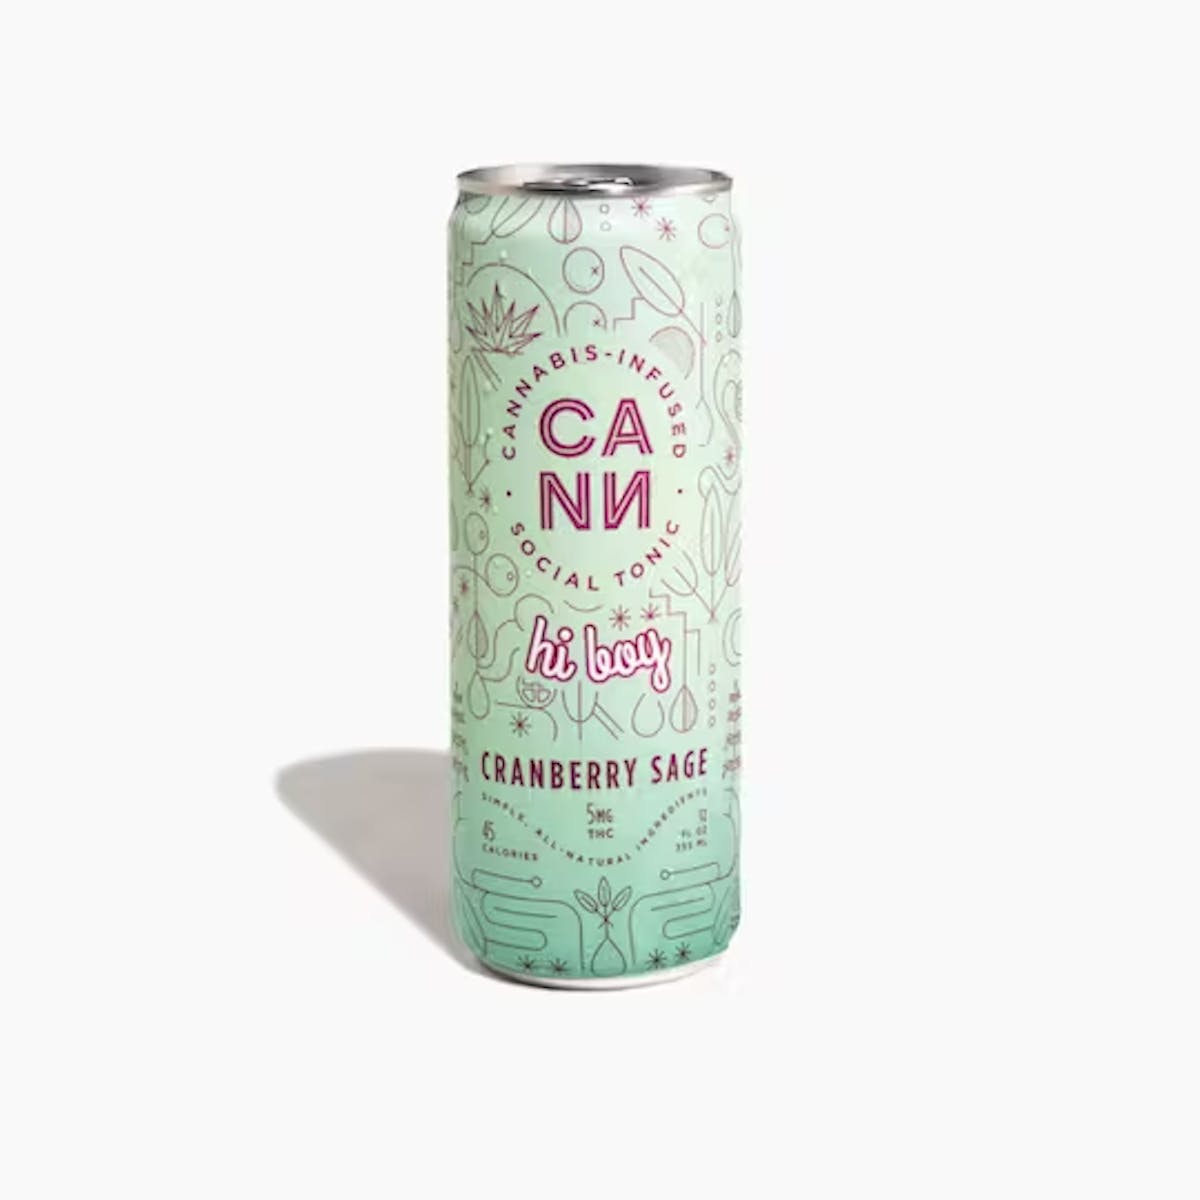 Cann Cranberry Sage THC Beverage Product Image